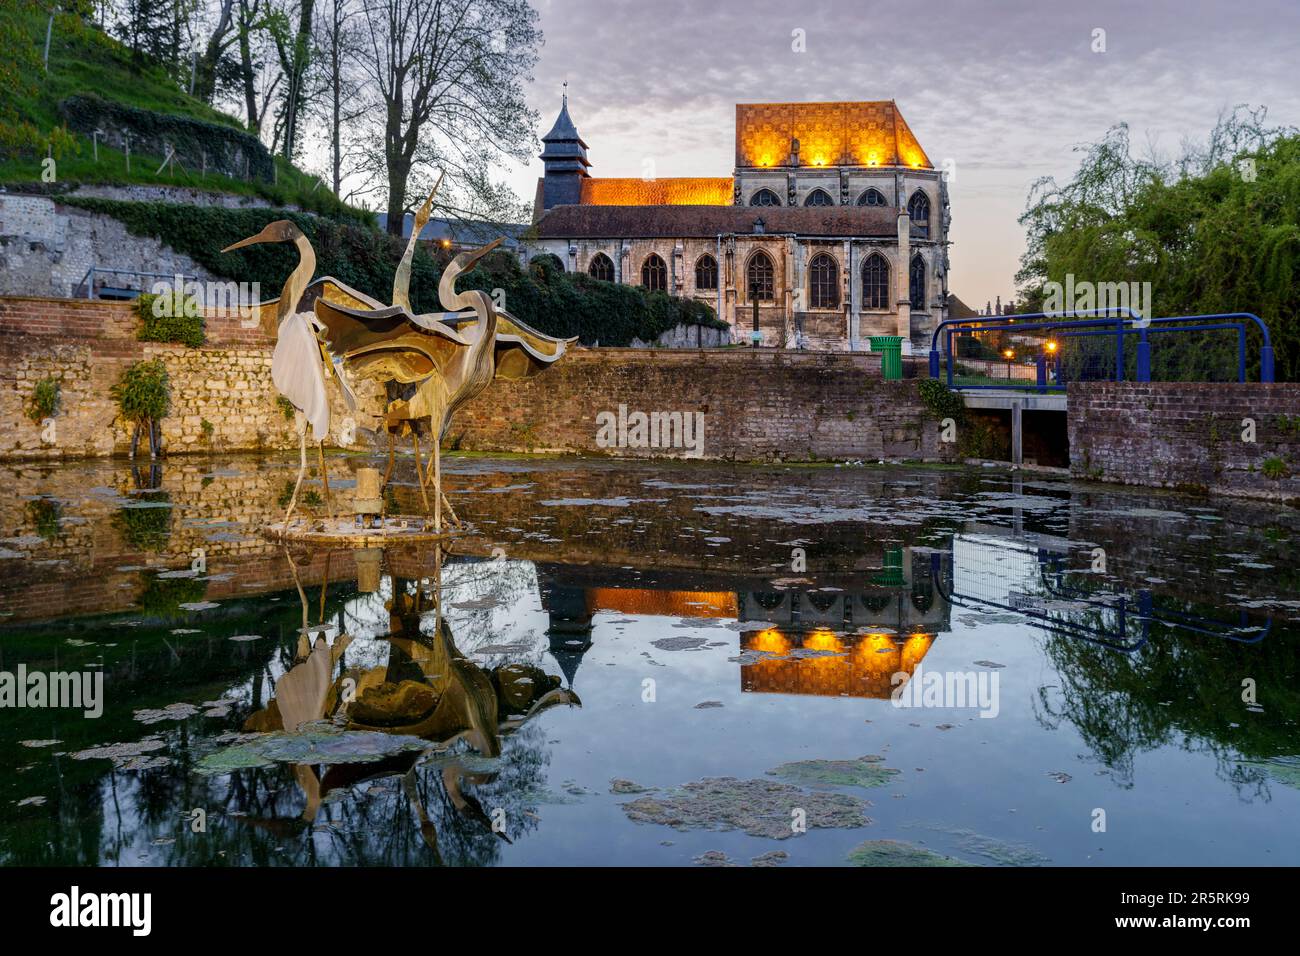 France, Seine-Maritime, Elbeuf-sur-Seine, designated as French Towns and Lands of Art and History, Puchot district, reflection of the Saint-Etienne church and resurgence of the stream named Puchot, in the René Youinou Garden, also called Spring Garden, sculpture by Nicolas Popelin, named The Three Herons Fountain Stock Photo